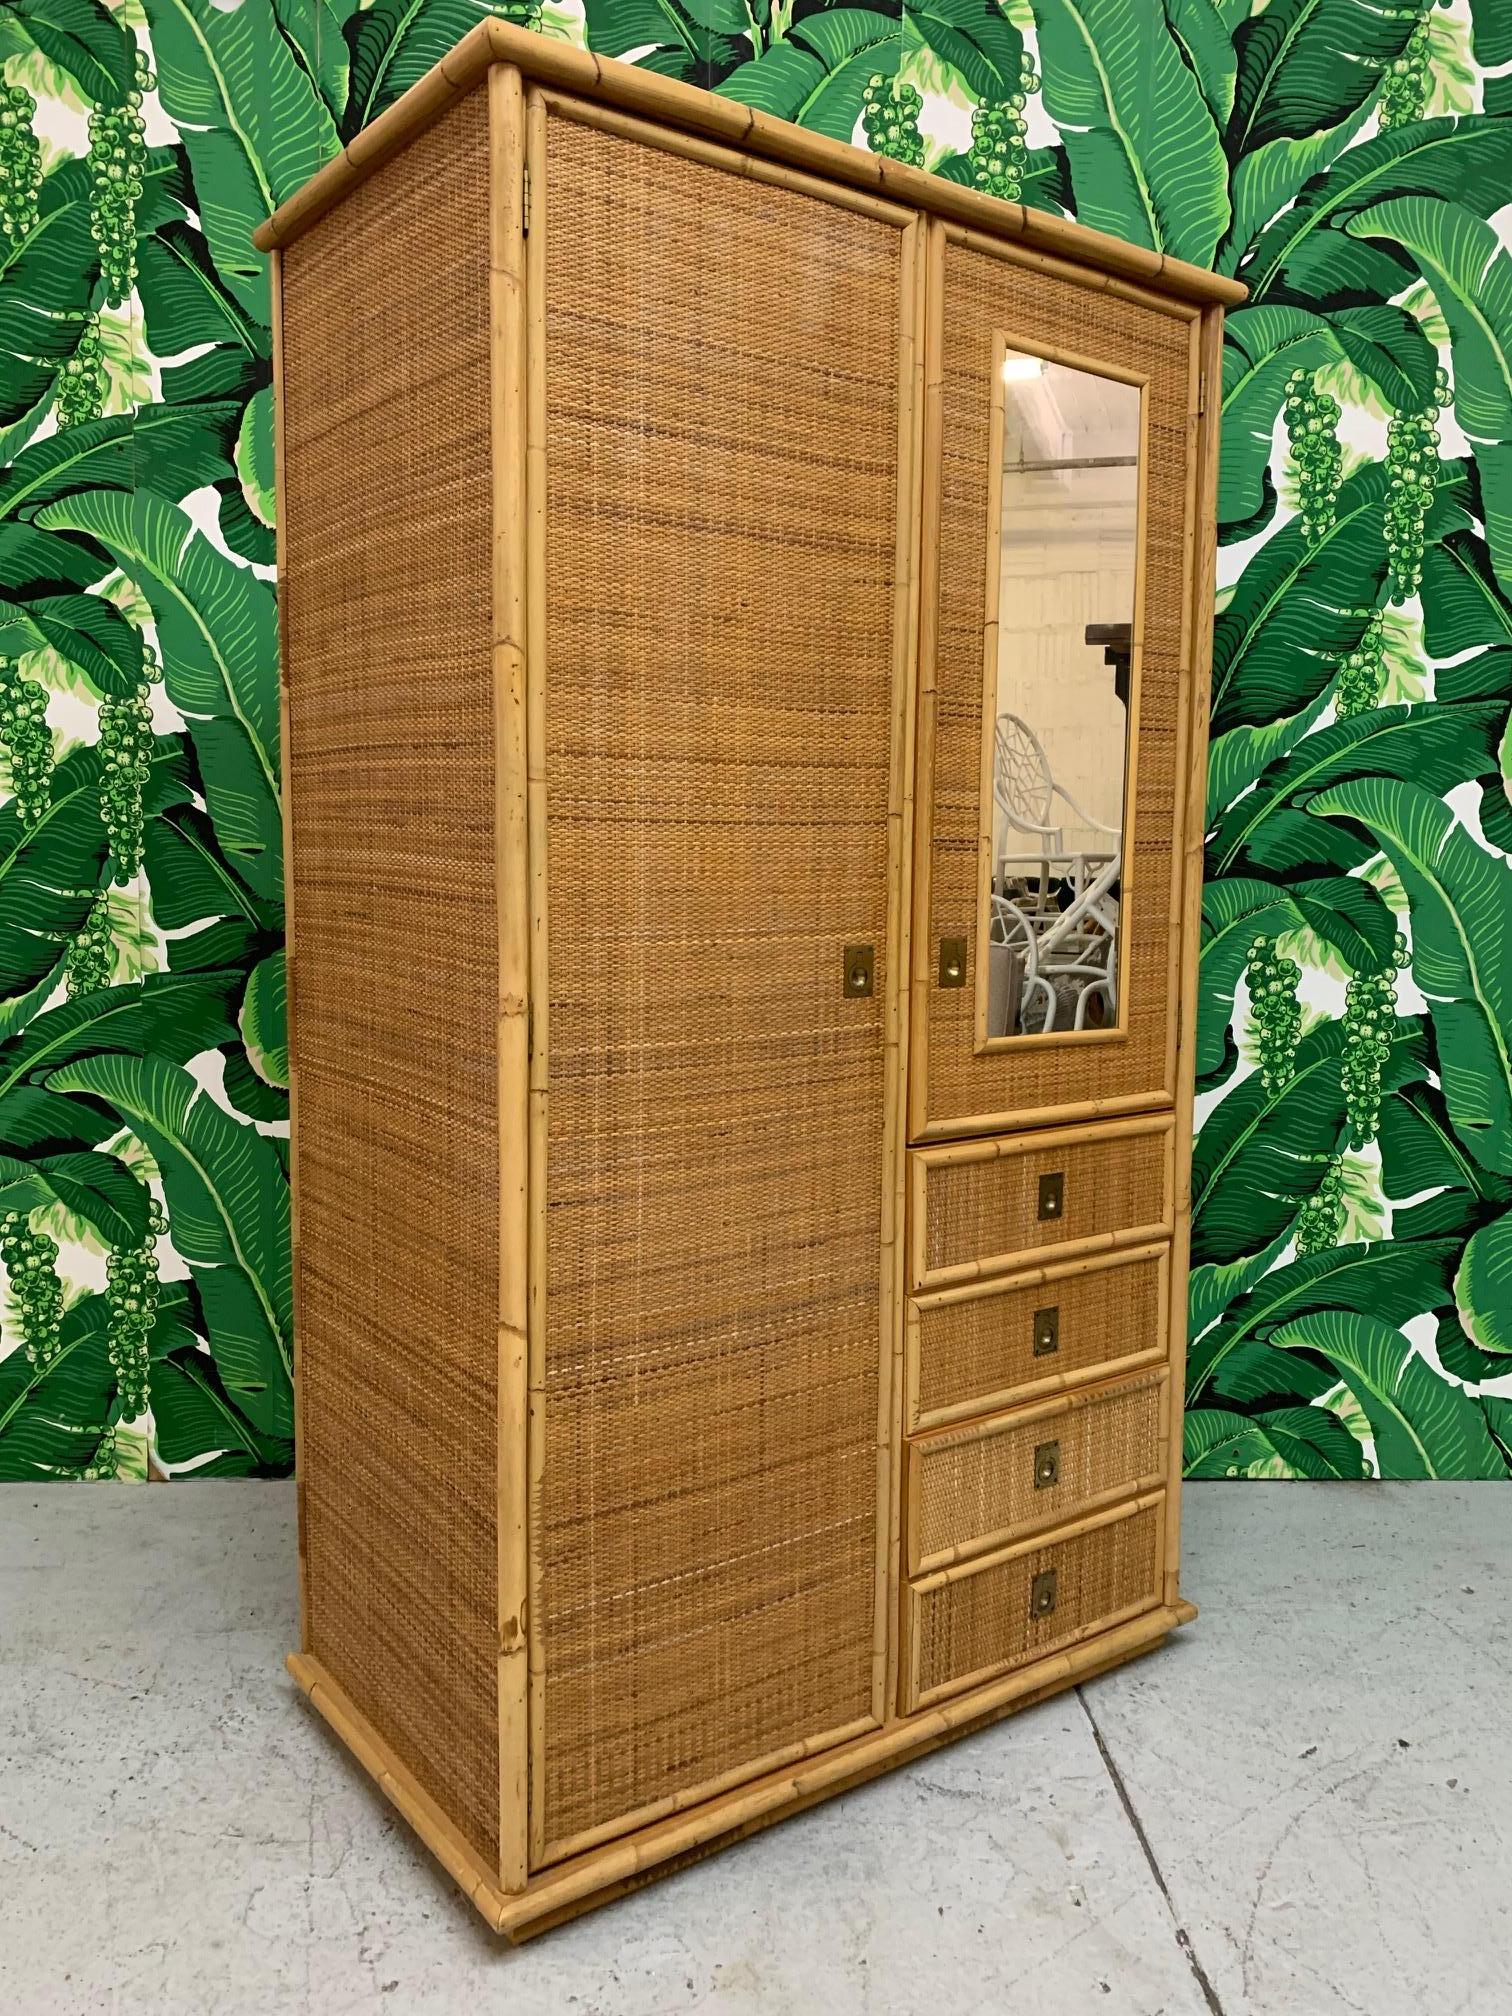 Large bamboo and woven wicker armoire features large storage spaces with clothes rods as well as 4 drawers. Bamboo detailing along all edges. Good condition other than crack on back side of cabinet. Can be seen from inside left cabinet door.